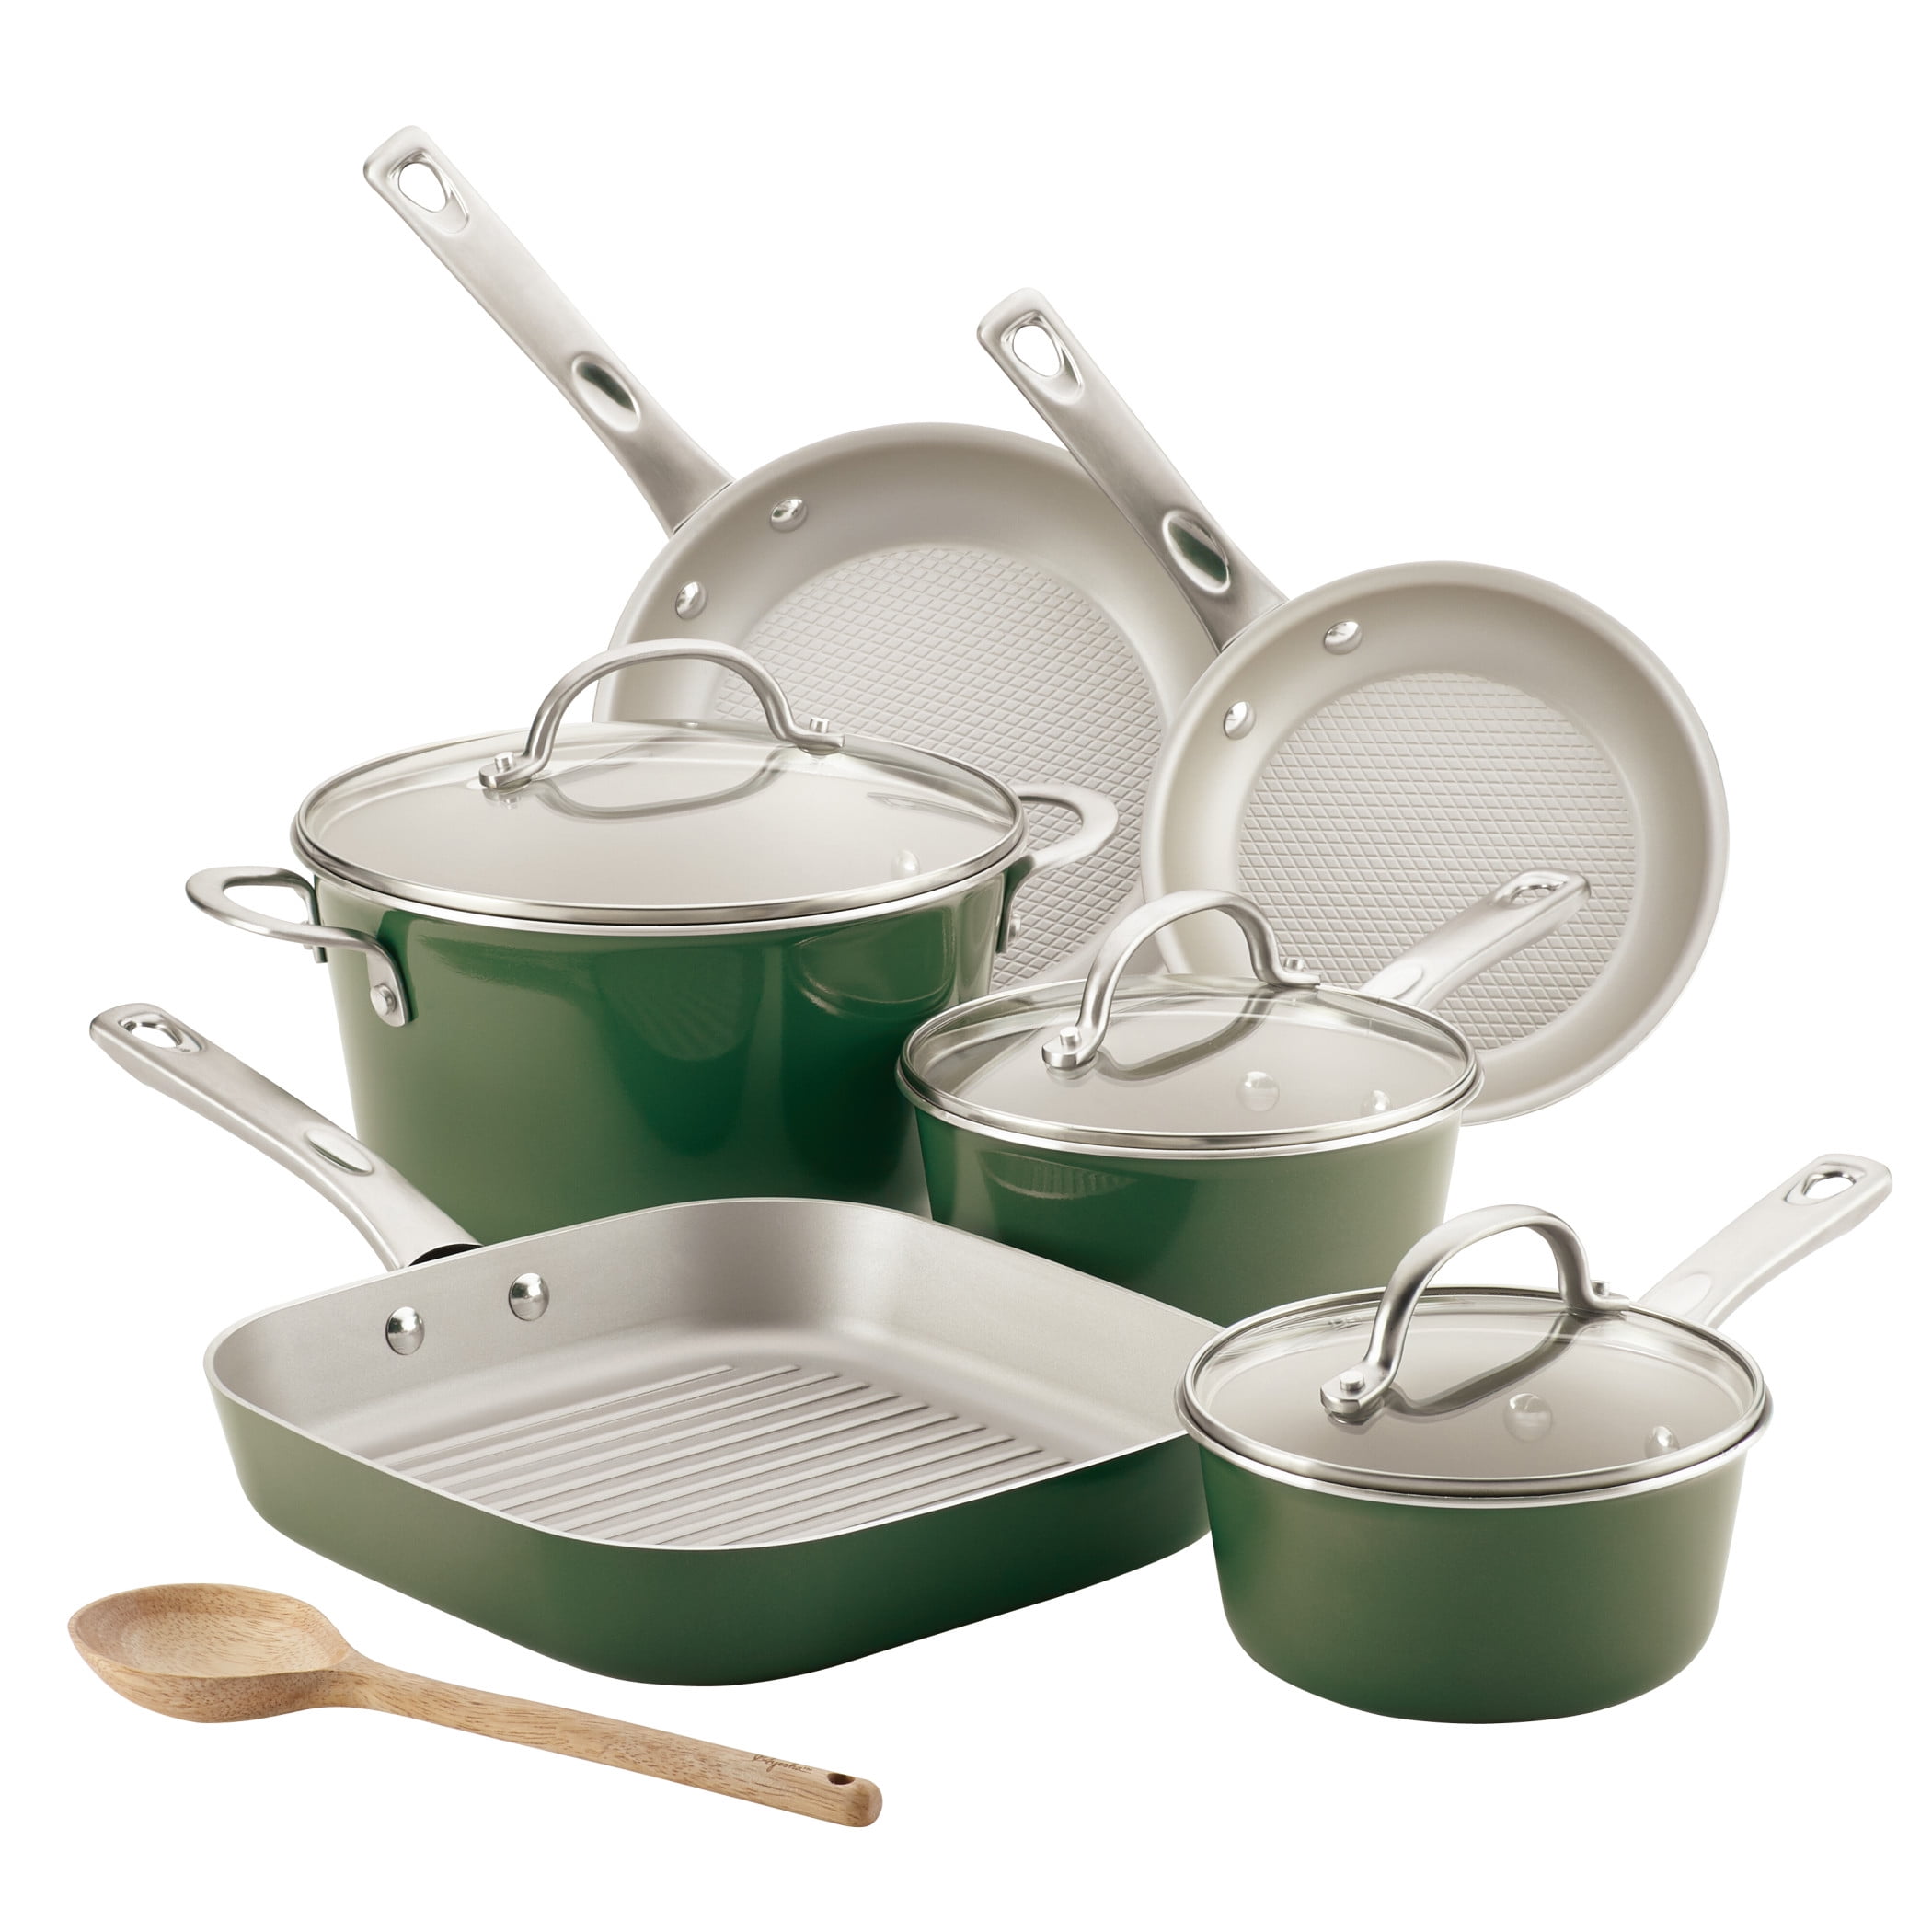 Ayesha Curry Home Collection Nonstick Cookware Pots and Pans Set Twilight Teal 9 Piece